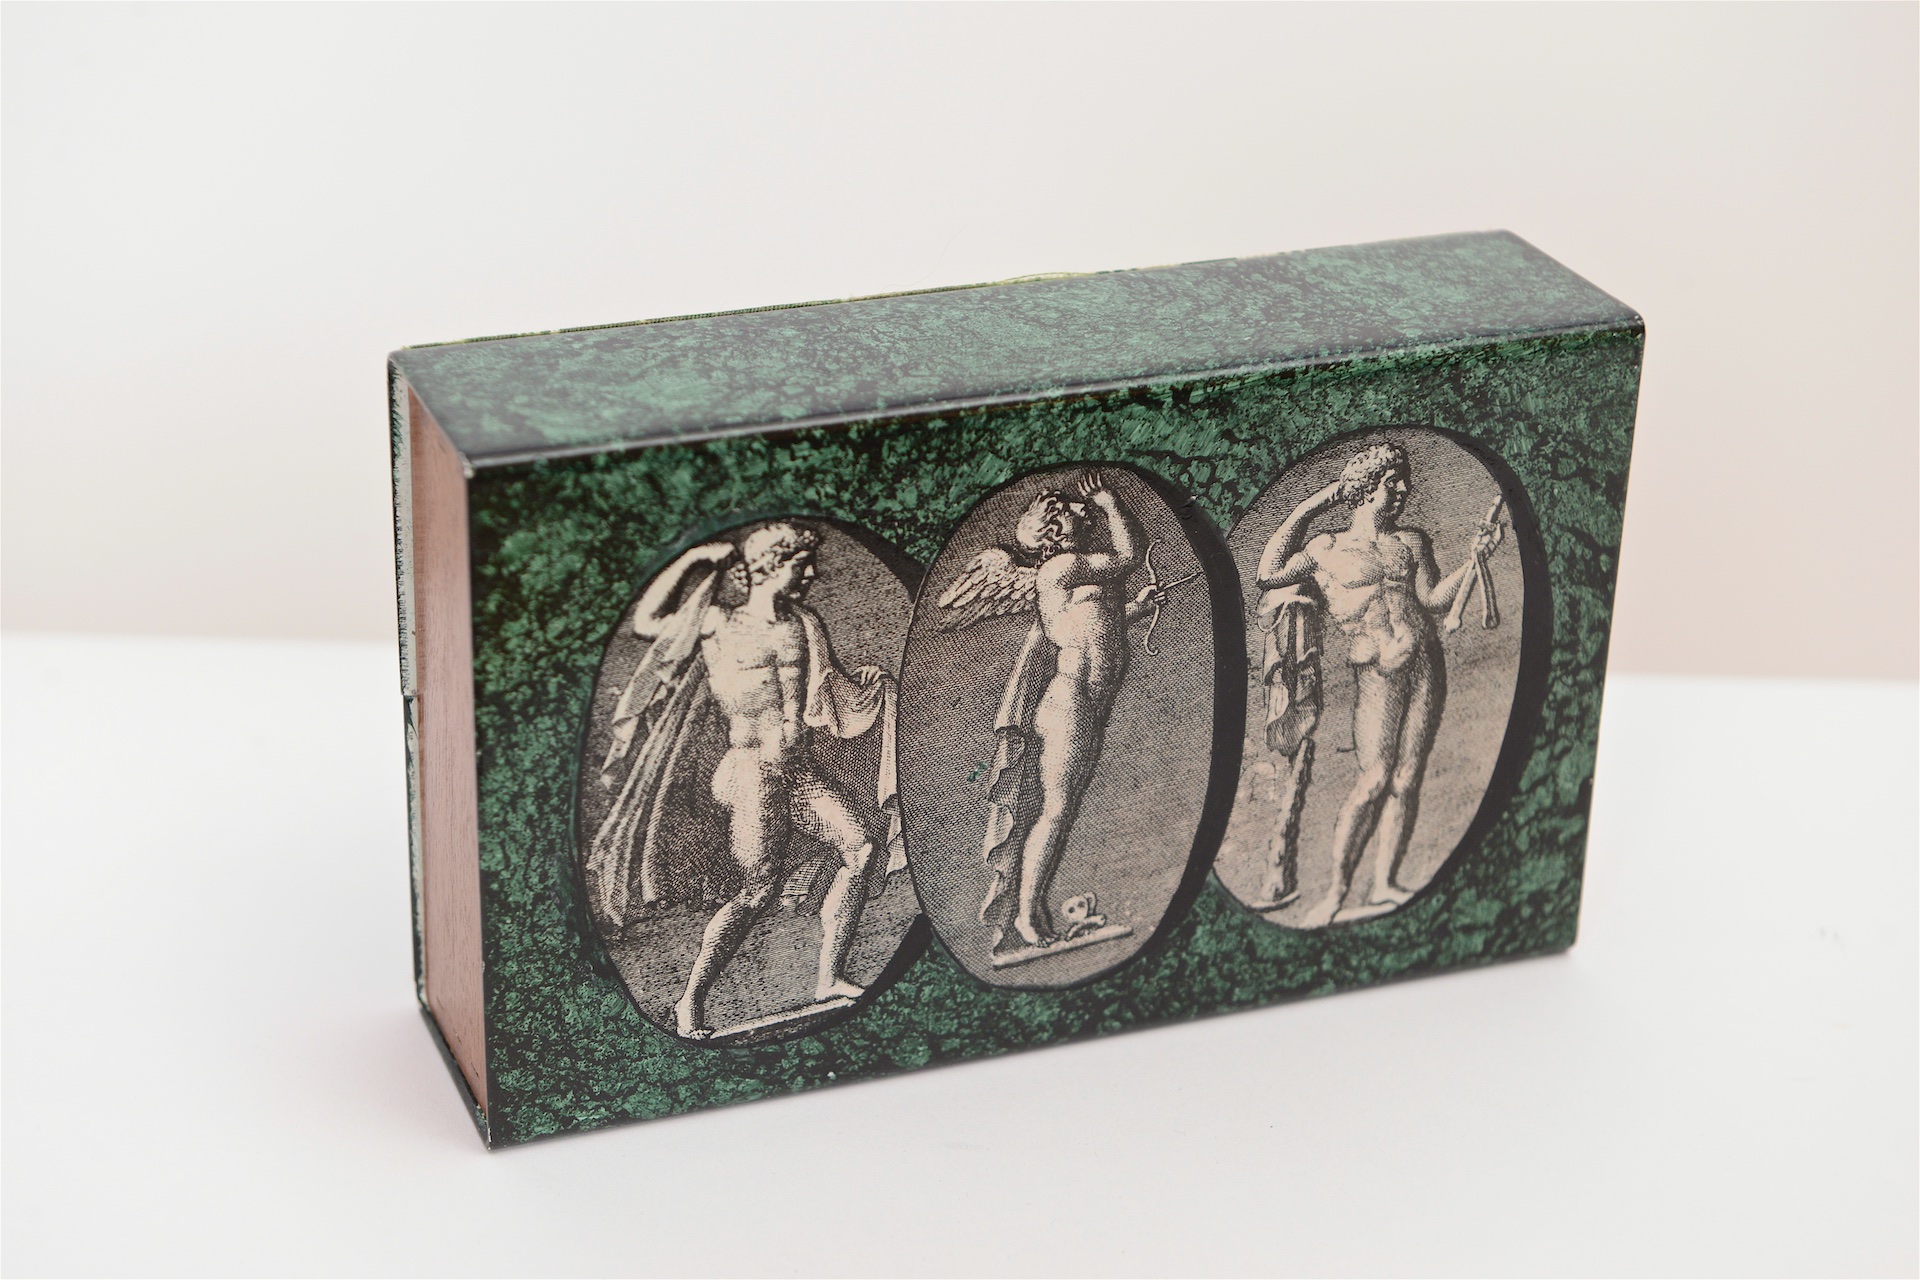 Decorative Box with Classical Figures by Fornasetti